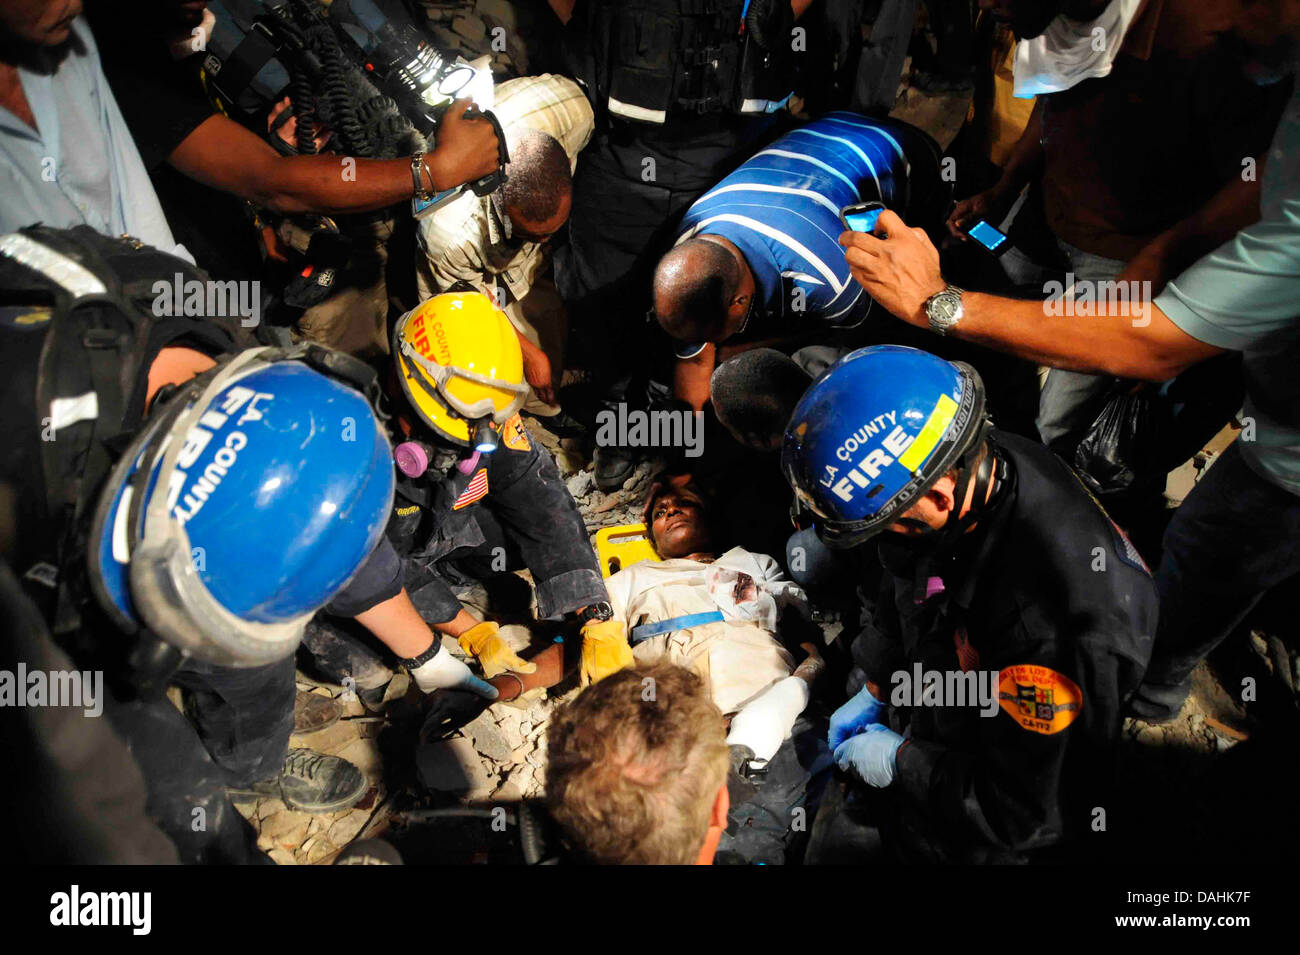 Members of the Los Angeles County Fire Department Search and Rescue Team rescue a Haitian woman from a collapsed building in the aftermath of a 7.0 magnitude earthquake that killed 220,000 people January 17, 2010 in Port-au-Prince, Haiti. The woman survived 5 days without food or water in the debris. Stock Photo